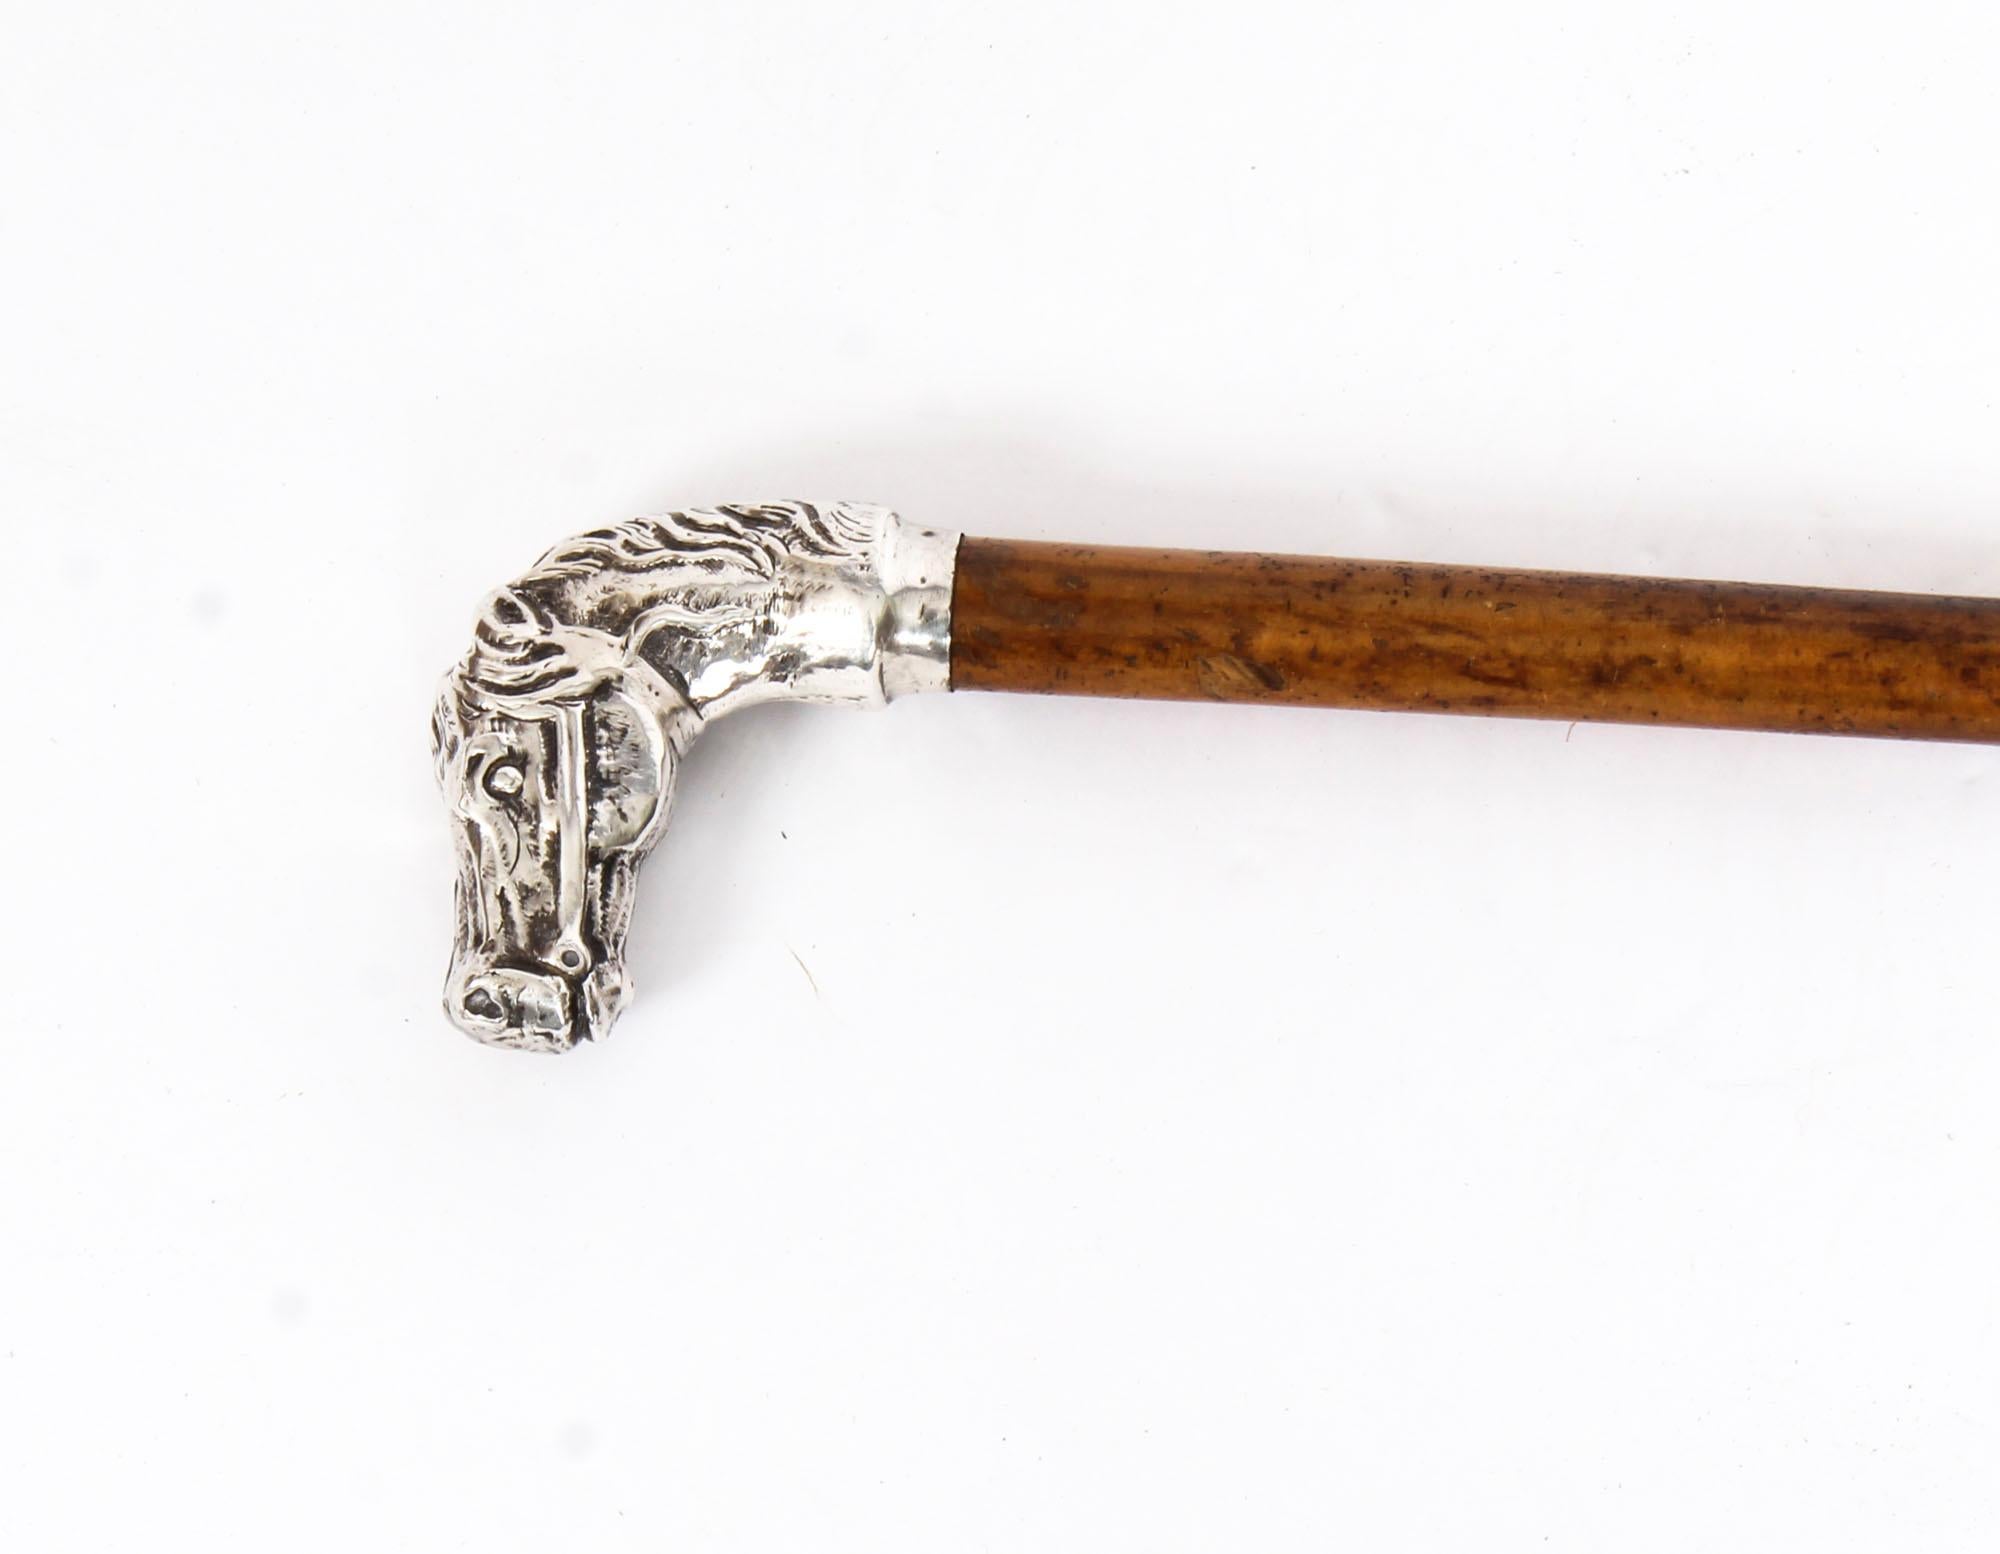 English Antique Walking Cane Stick Sterling Silver Horse Head Handle 1888, 19th Century